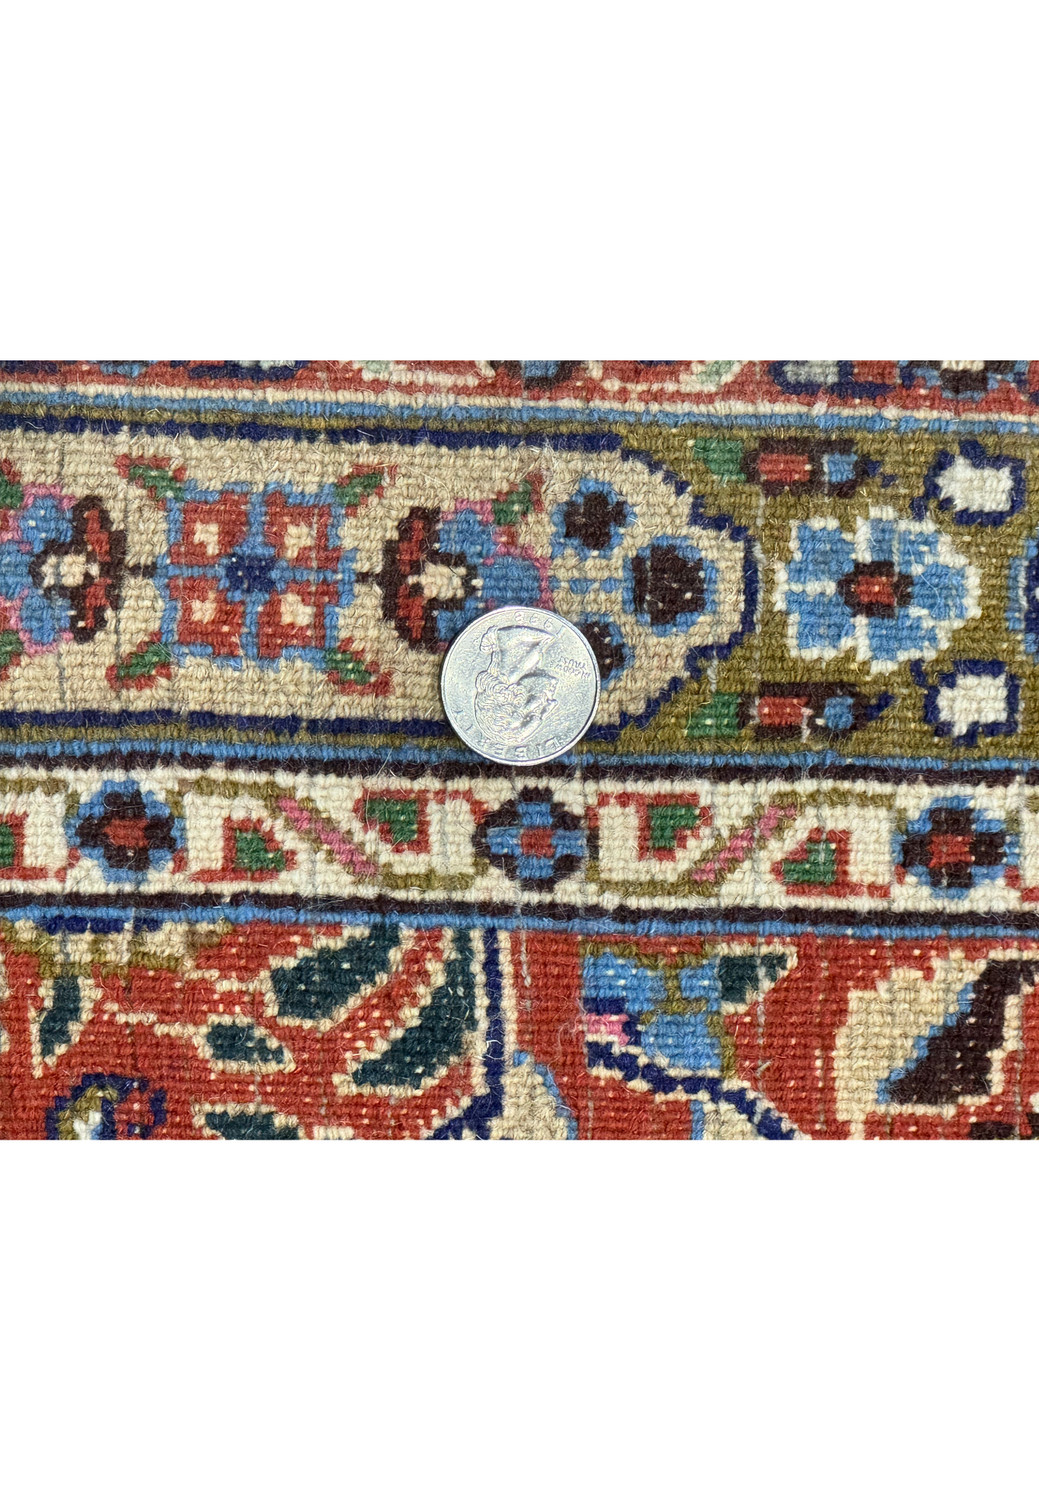 A close-up image showing a quarter coin placed on the Persian Moud Rug to demonstrate the high density of the weave and the fine quality of the craftsmanship